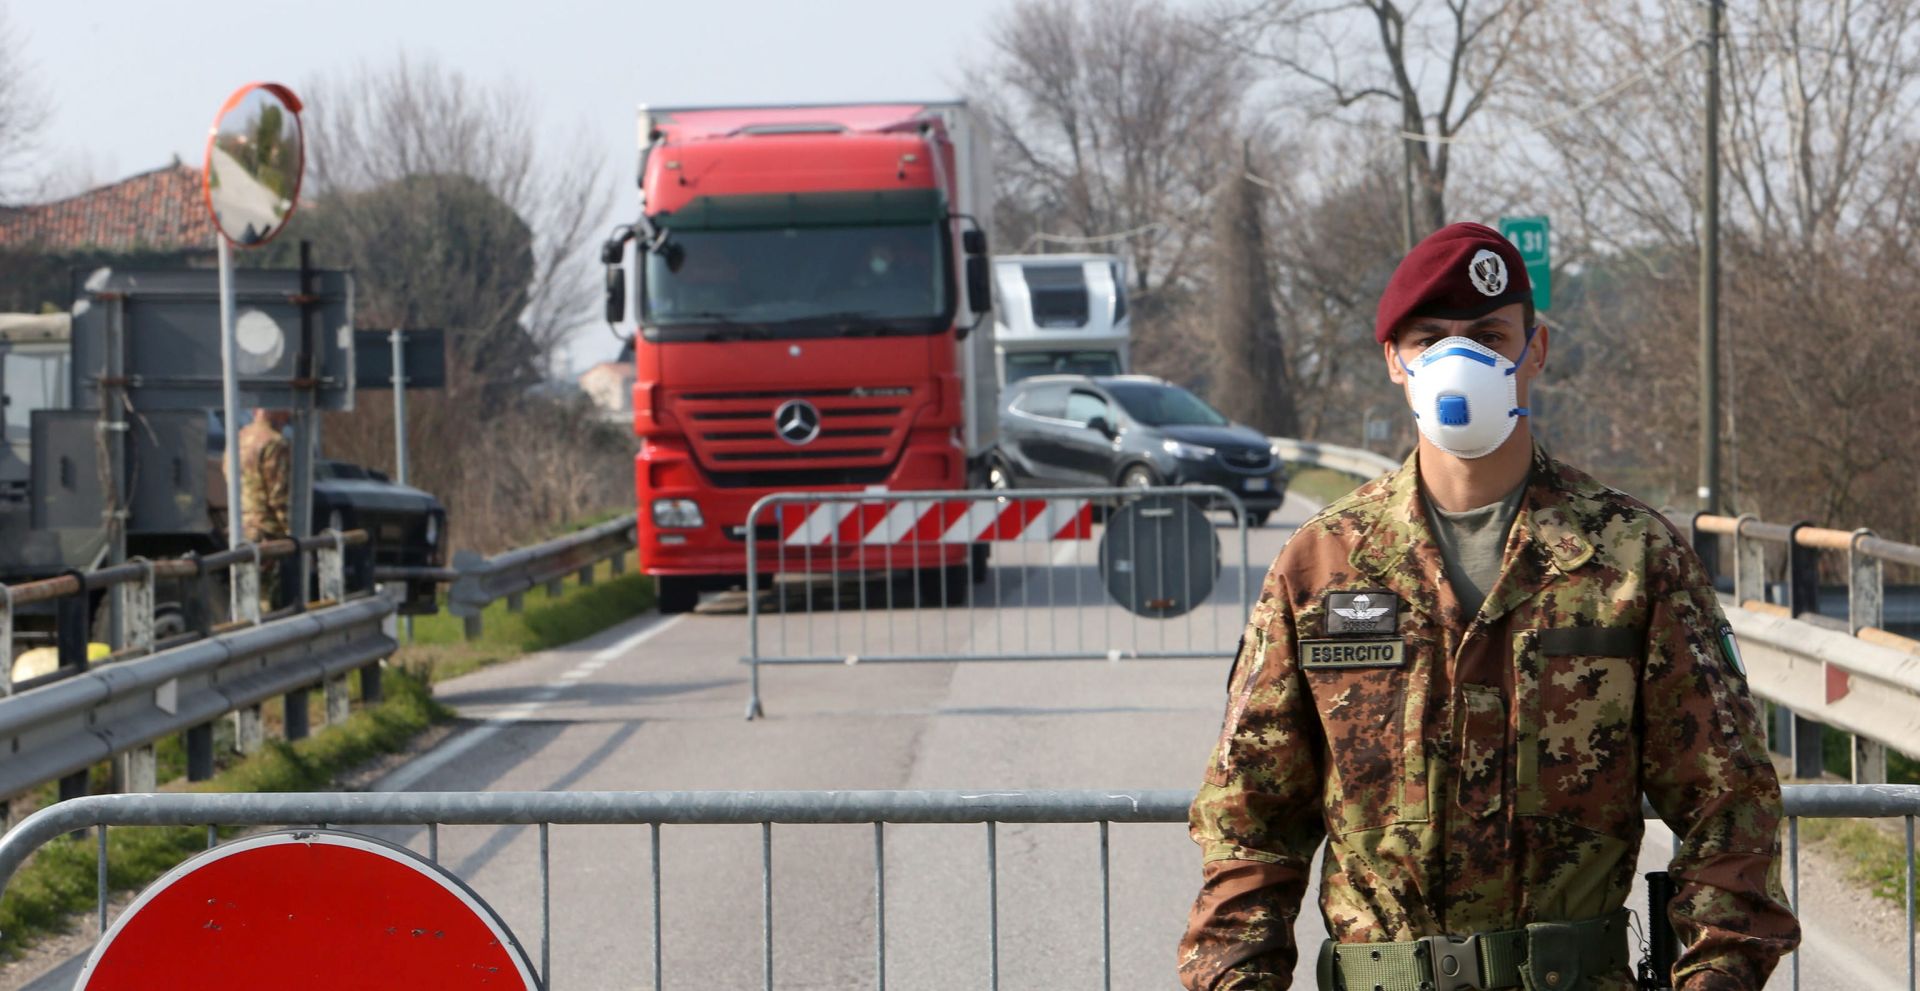 epa08244050 An Italian Army officer wearing a protective face mask stands at a roadblock at the entrance to the small town of Vo' Euganeo, near Padova, northern Italy, 24 February 2020. Italian authorities announced on the day that there are over 200 confirmed cases of COVID-19 disease in the country, with at least five deaths. Precautionary measures and ordinances to tackle the spreading of the deadly virus included the closure of schools, gyms, museums and cinemas in the affected areas in northern Italy.